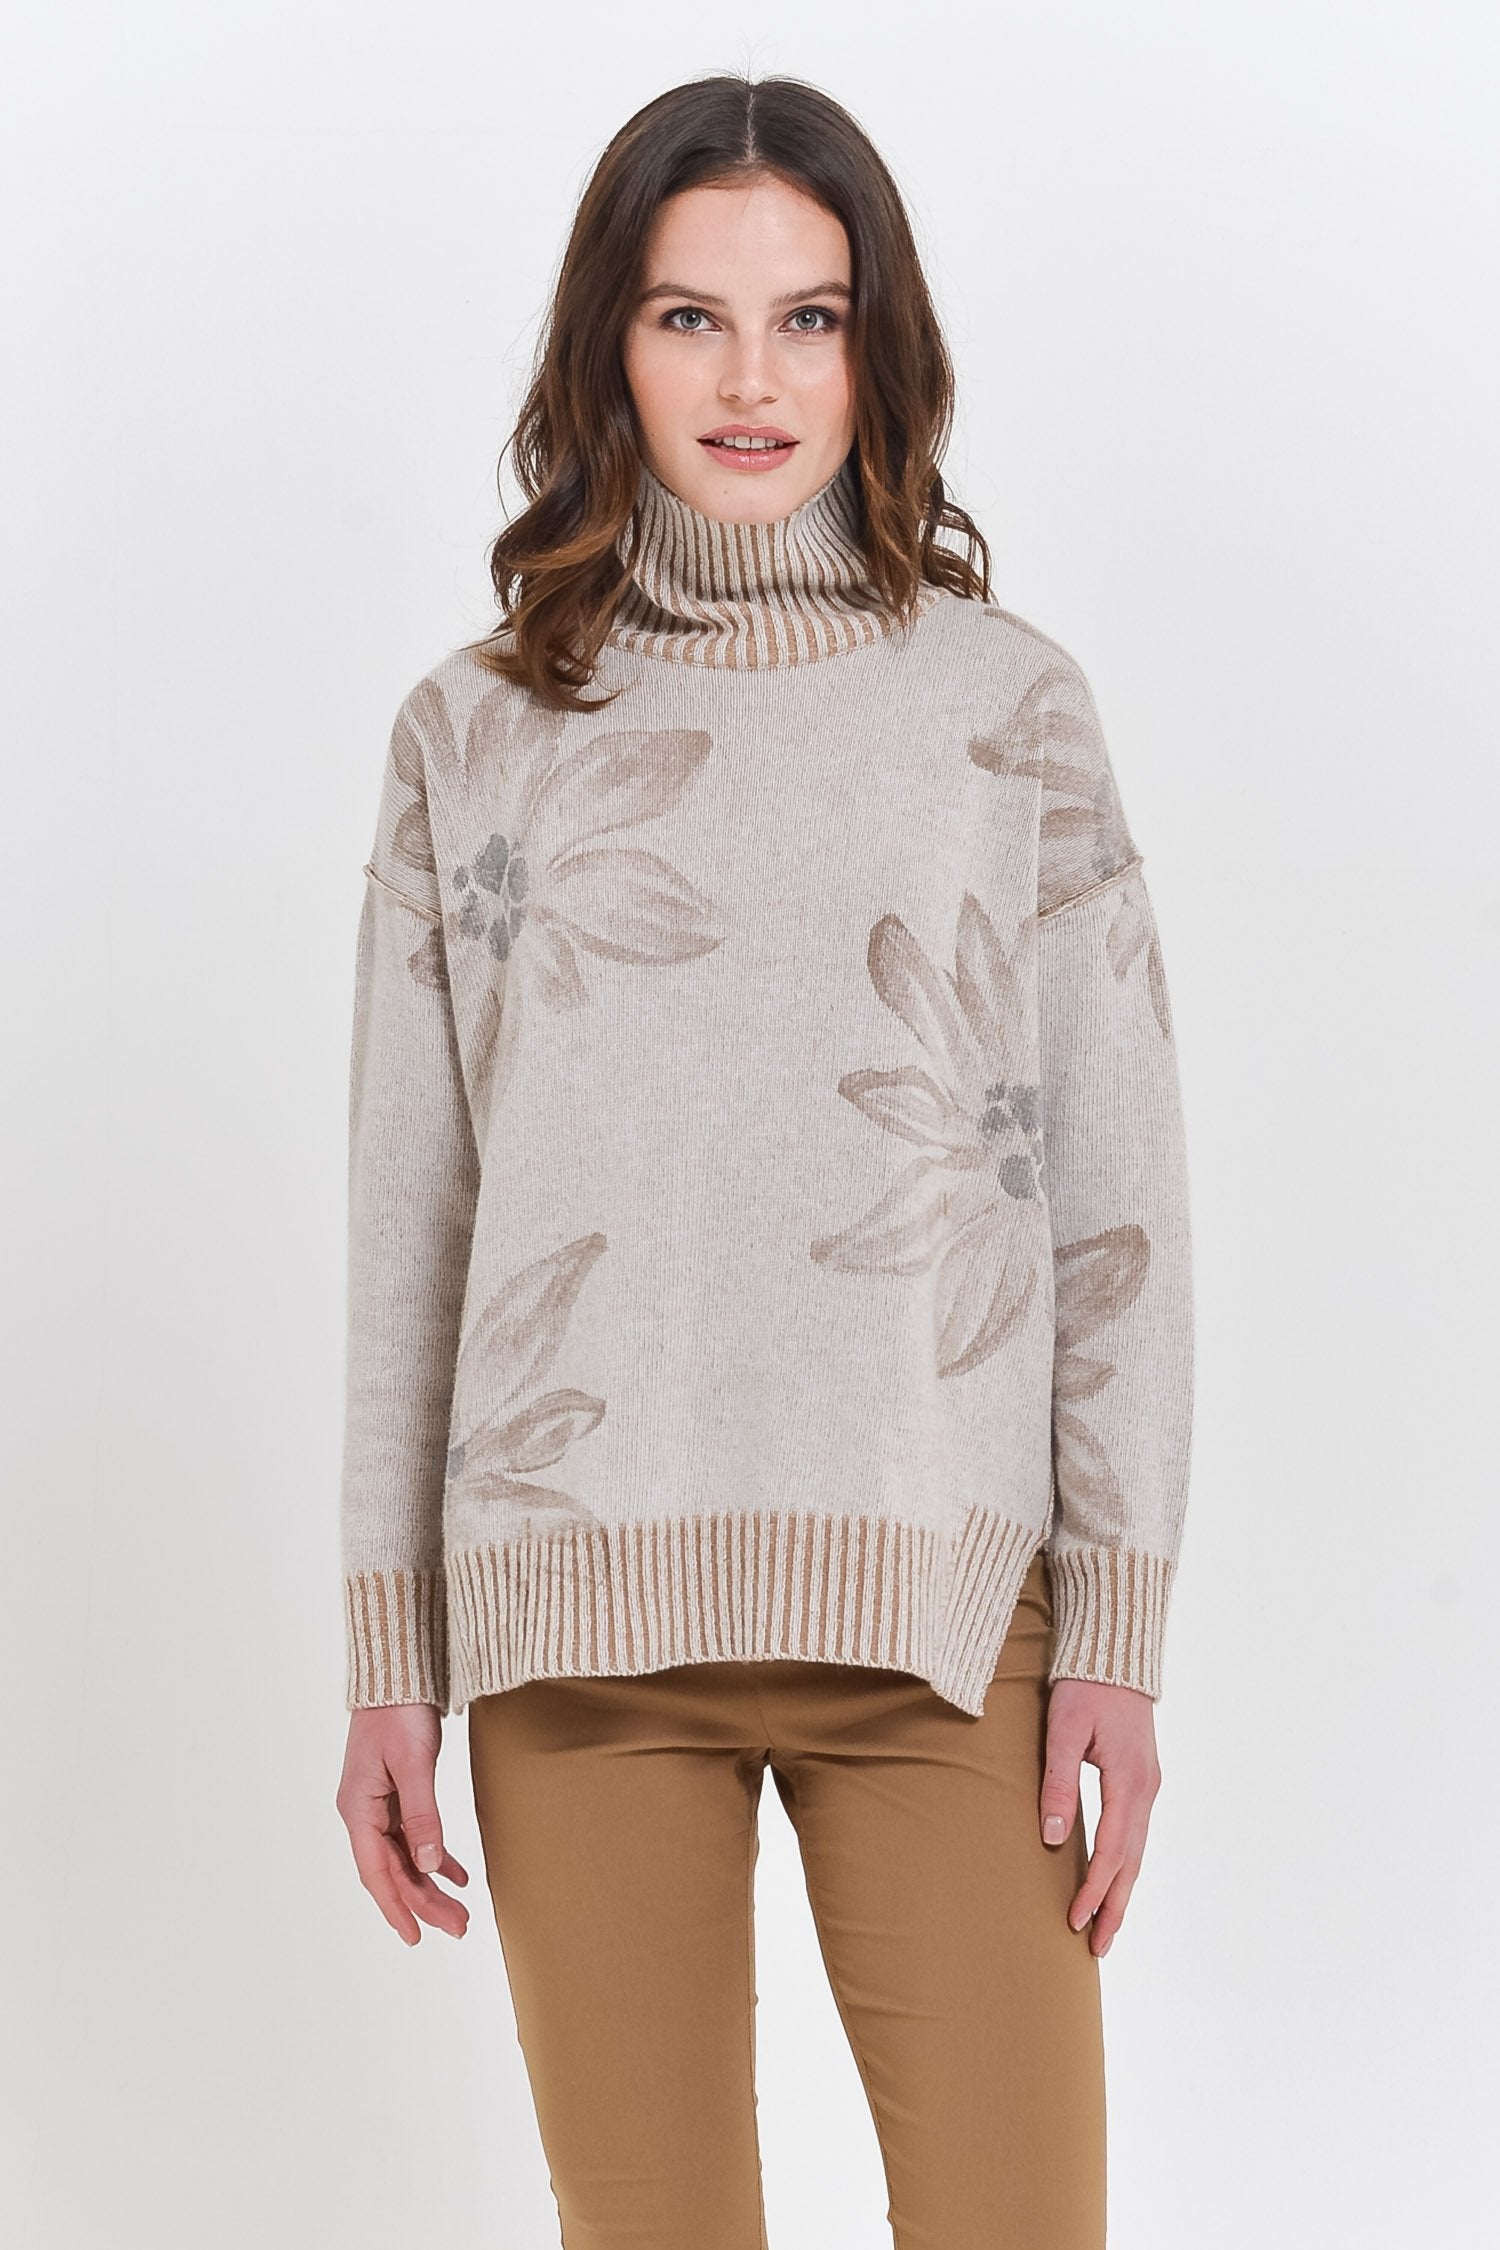 Bothy Edel Wood - Hand-Painted Plated Turtleneck Sweater - 